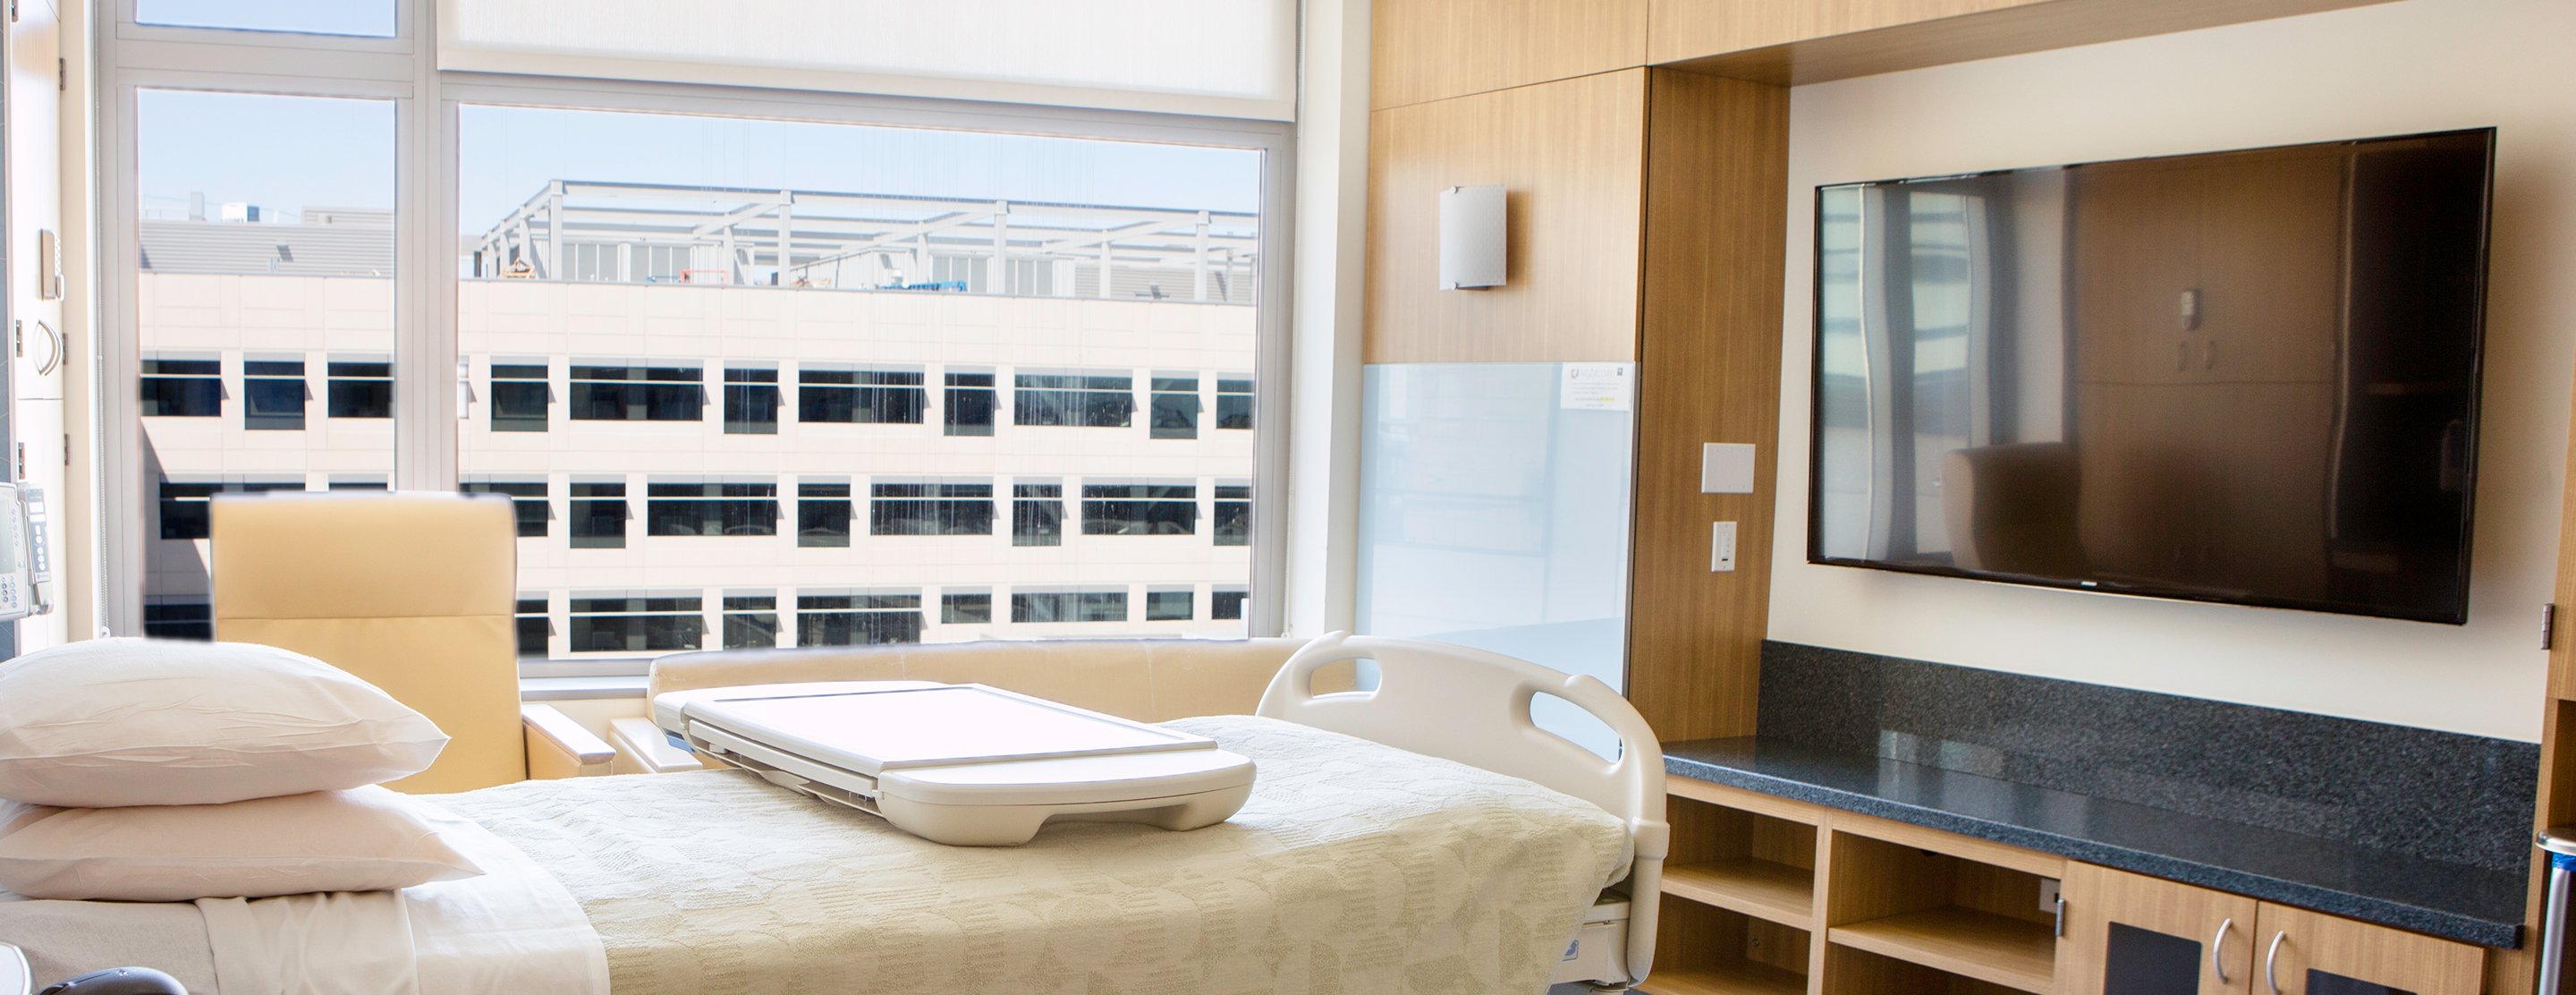 Patient Rooms | Your Hospital Stay | UCSF Health